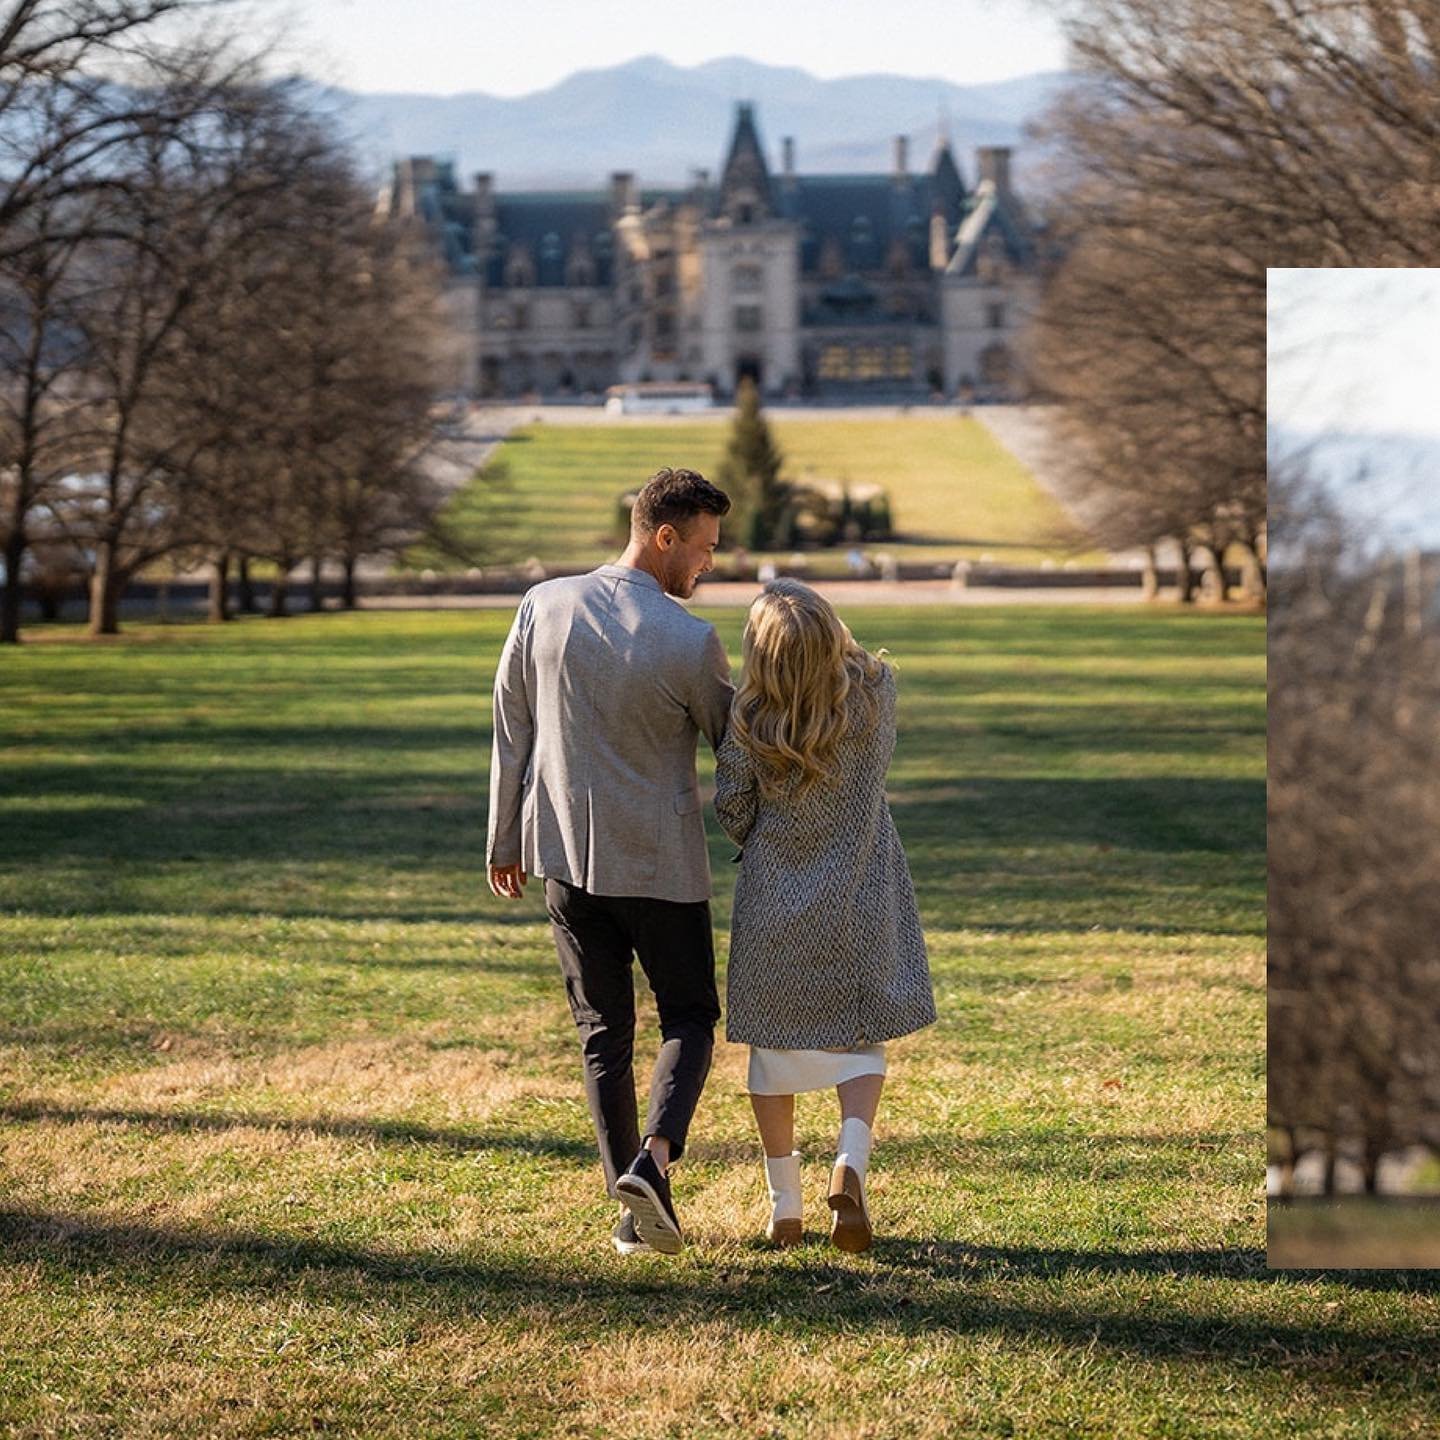 Chad&rsquo;s precision planning turned Kirsten&rsquo;s dream proposal into reality at the Biltmore Estate, a winter wonderland adorned with twinkling lights. From the surprise moment to the heartfelt &lsquo;yes,&rsquo; every detail was flawlessly exe